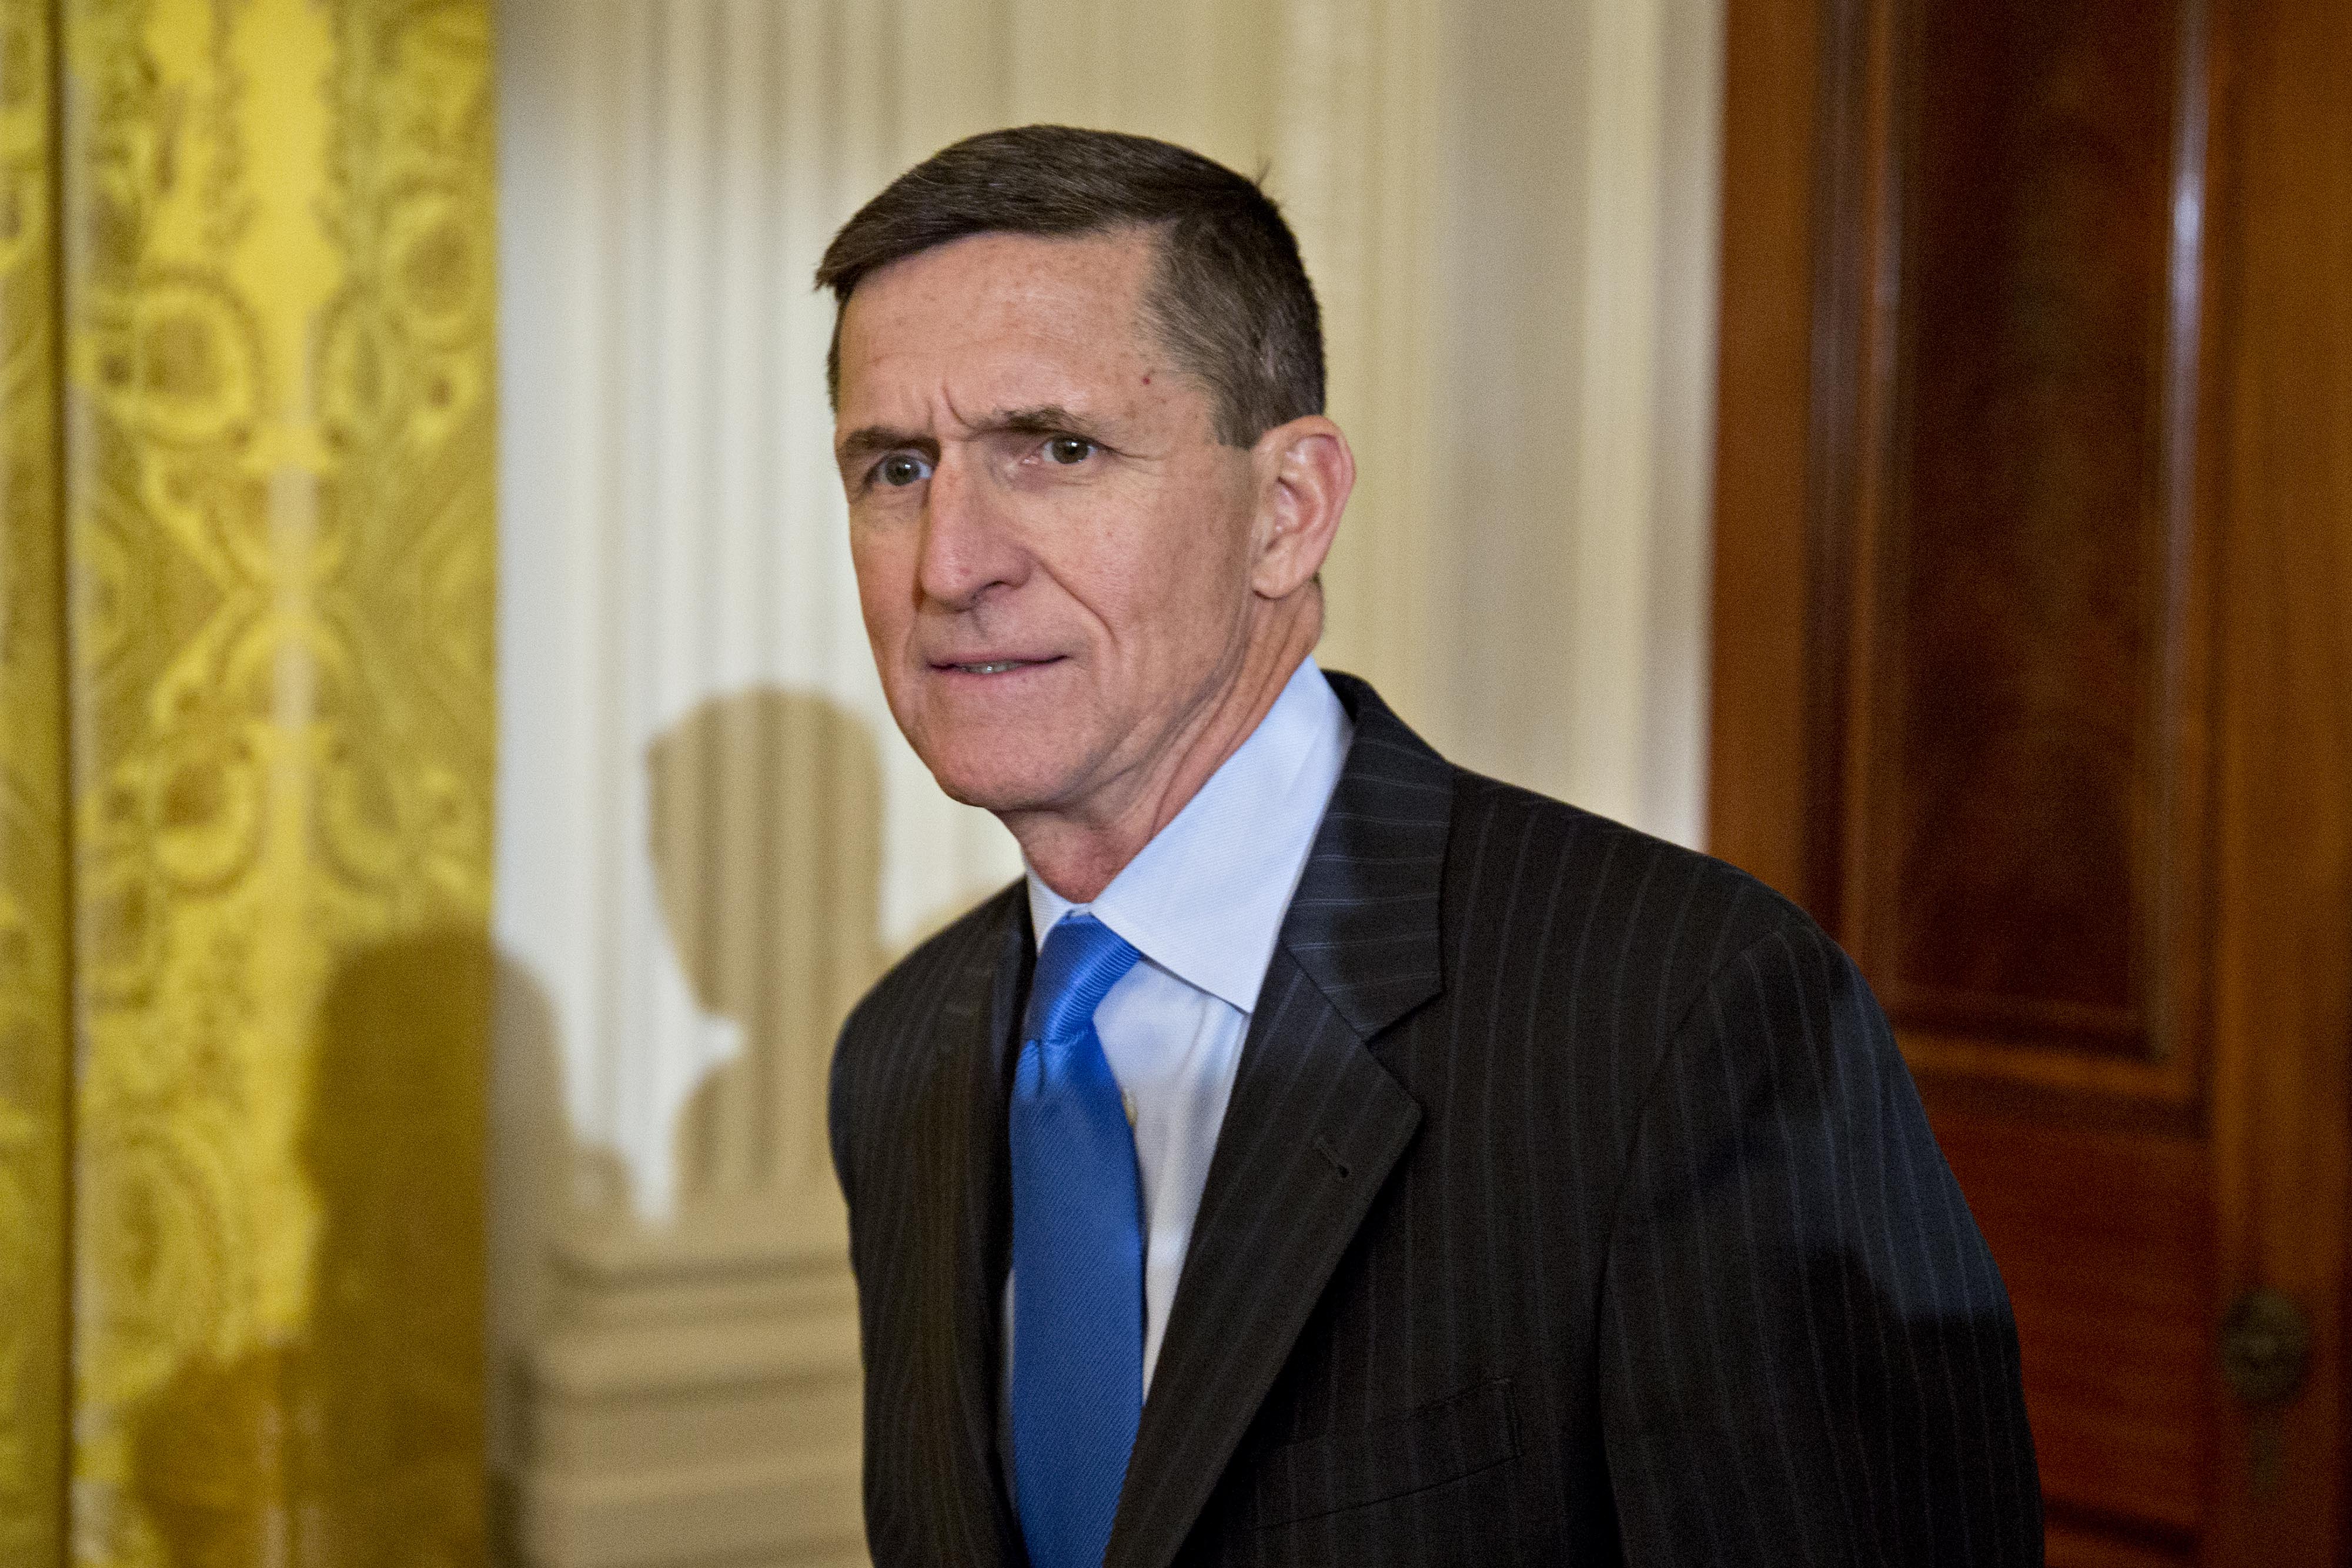 Retired Lieutenant General Michael Flynn arrives to a swearing in ceremony of White House senior staff in the White House in Washington, D.C., Jan. 22, 2017. (Andrew Harrer&mdash;Bloomberg/Getty Images)